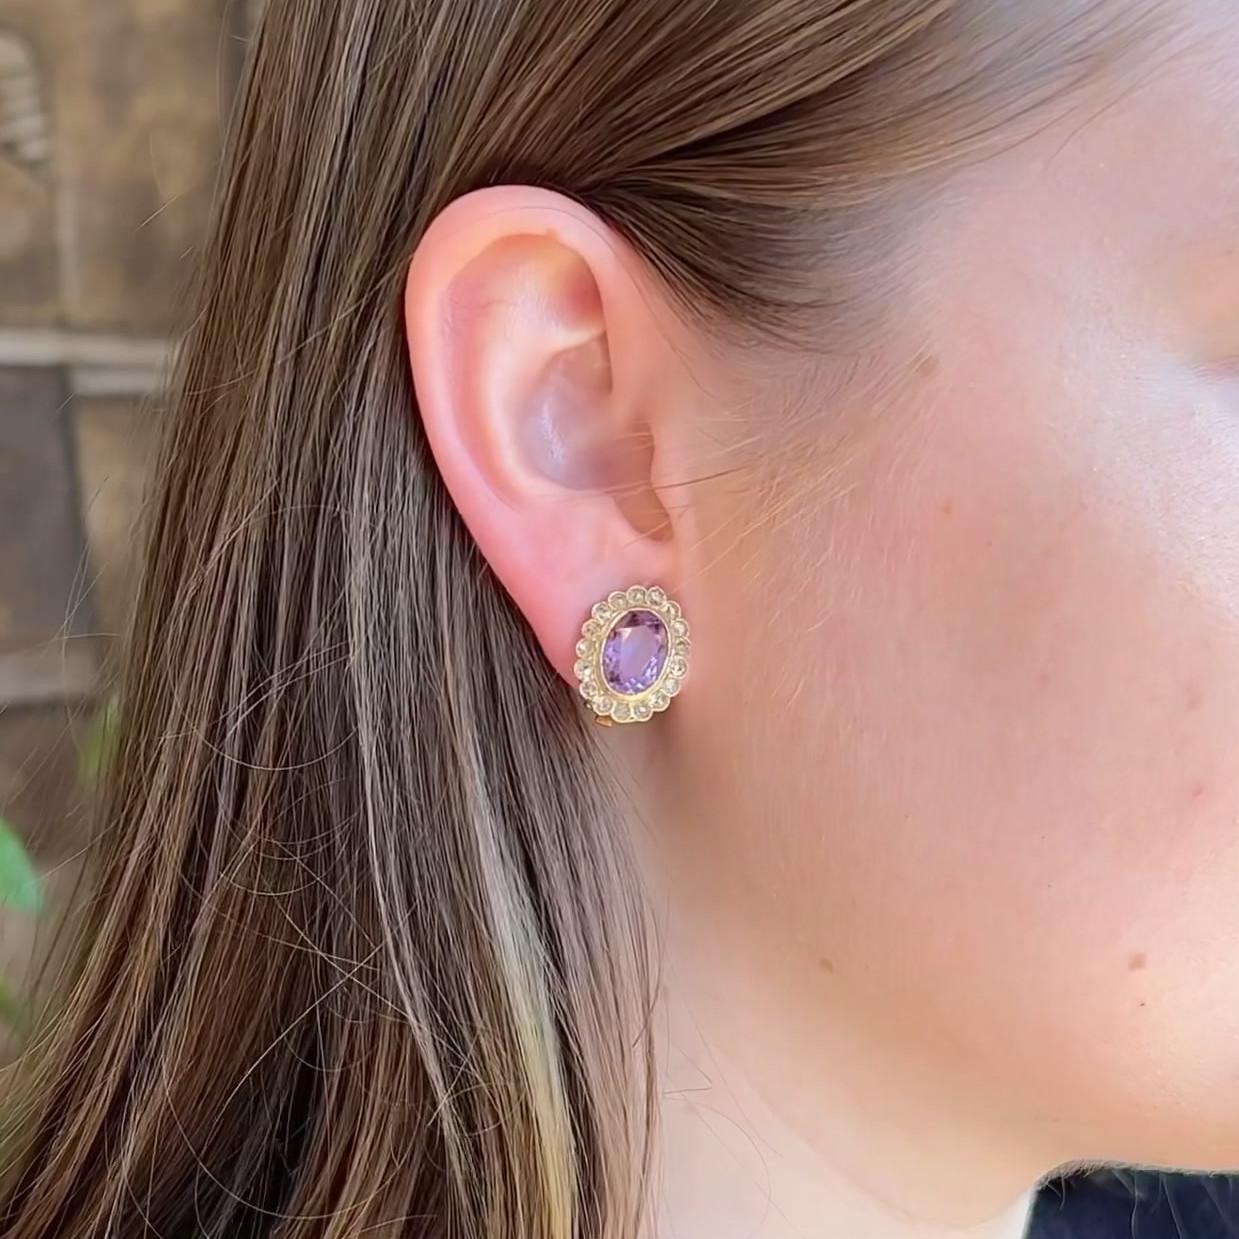 One Pair of Antique Amethyst Diamond 18 Karat Yellow Gold Clip On Earrings. Featuring two oval brilliant cut amethysts with a total weight of approximately 4.85 carats. Accented by 34 rose cut diamonds with a total weight of approximately 1.35